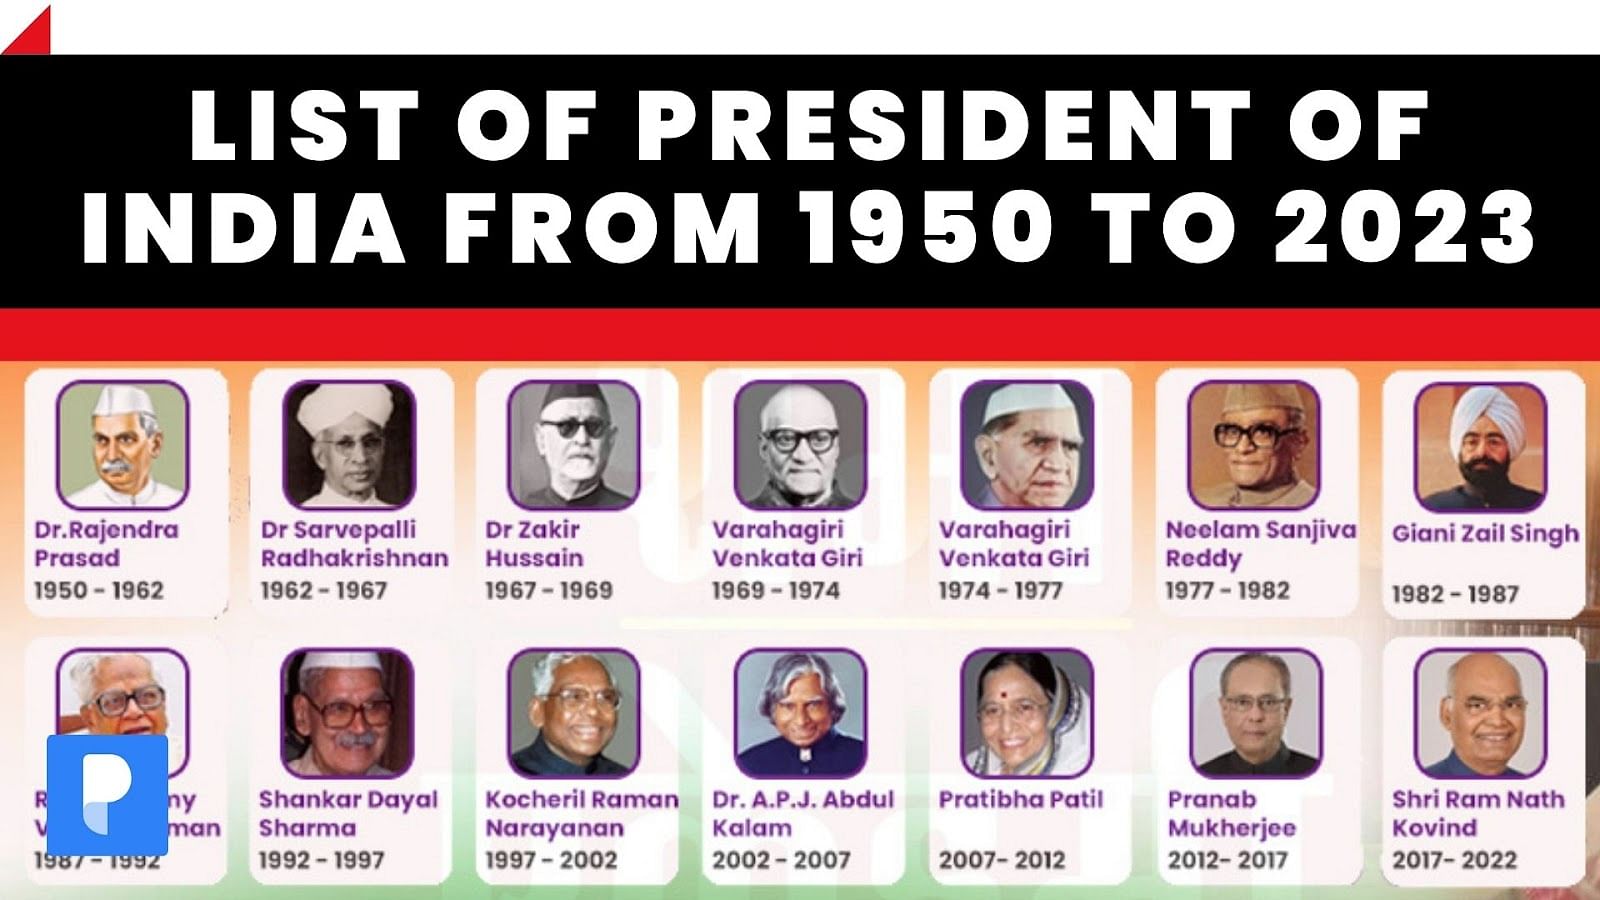 List of President of India from 1950 to 2023